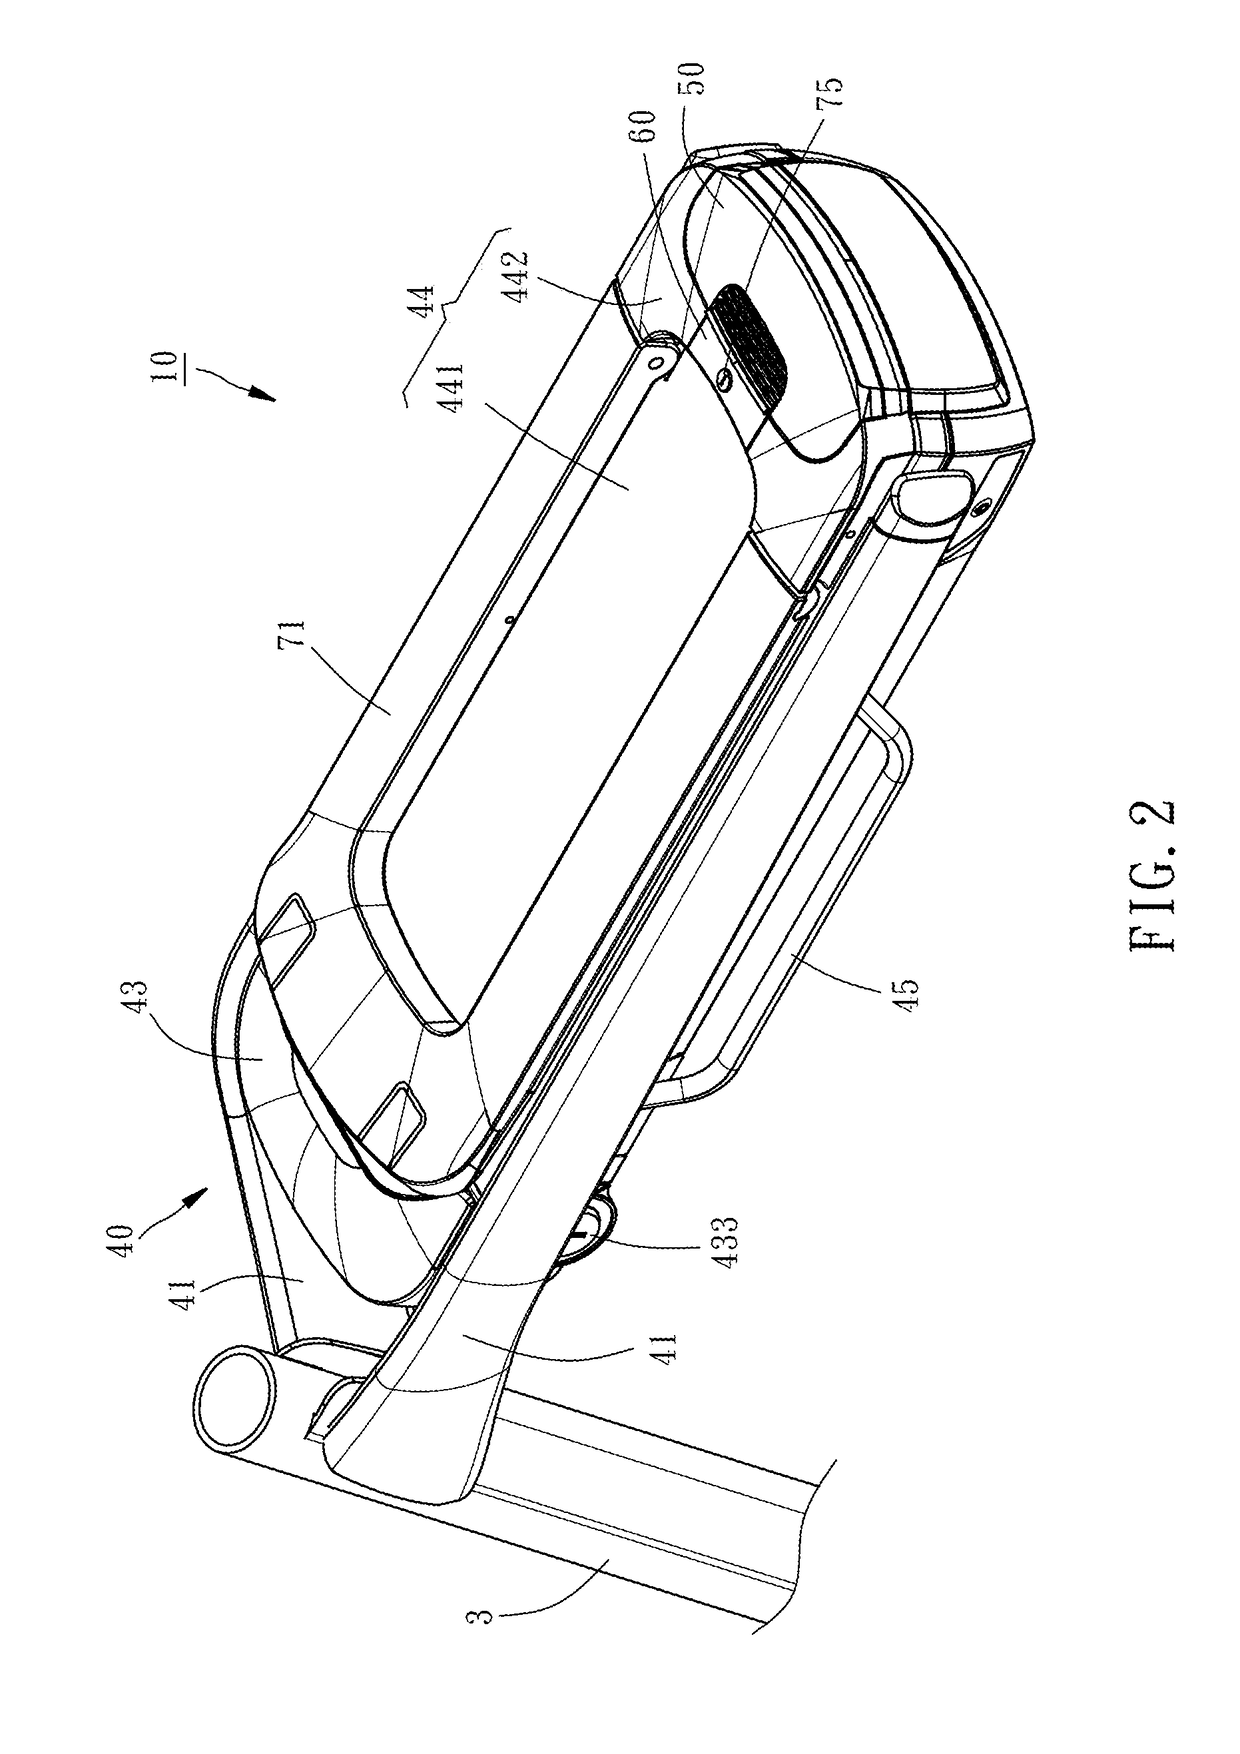 Bicycle mounting mechanism and battery box assembly